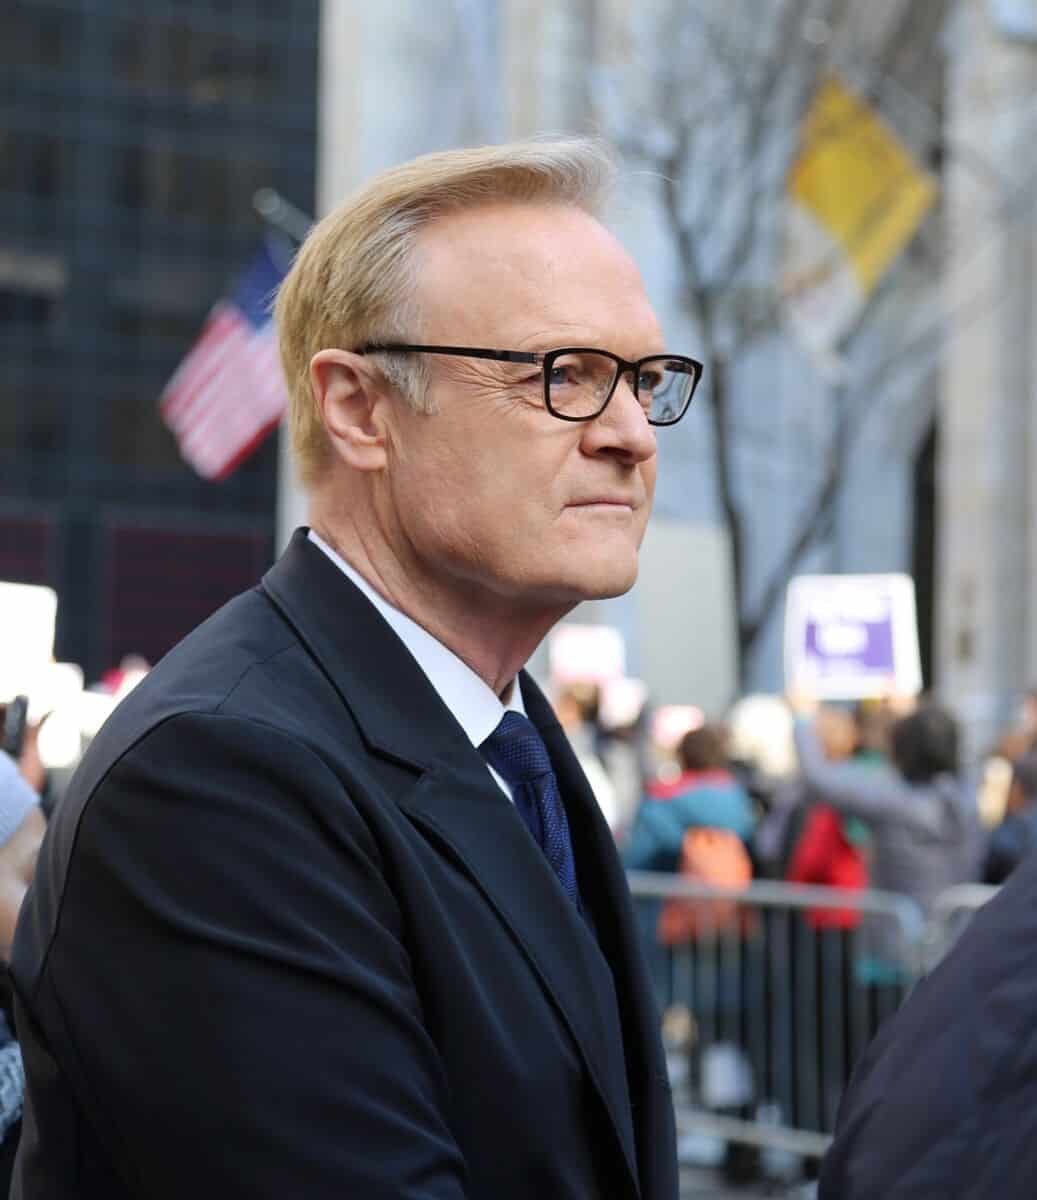 Lawrence O'Donnell - Famous Commentator